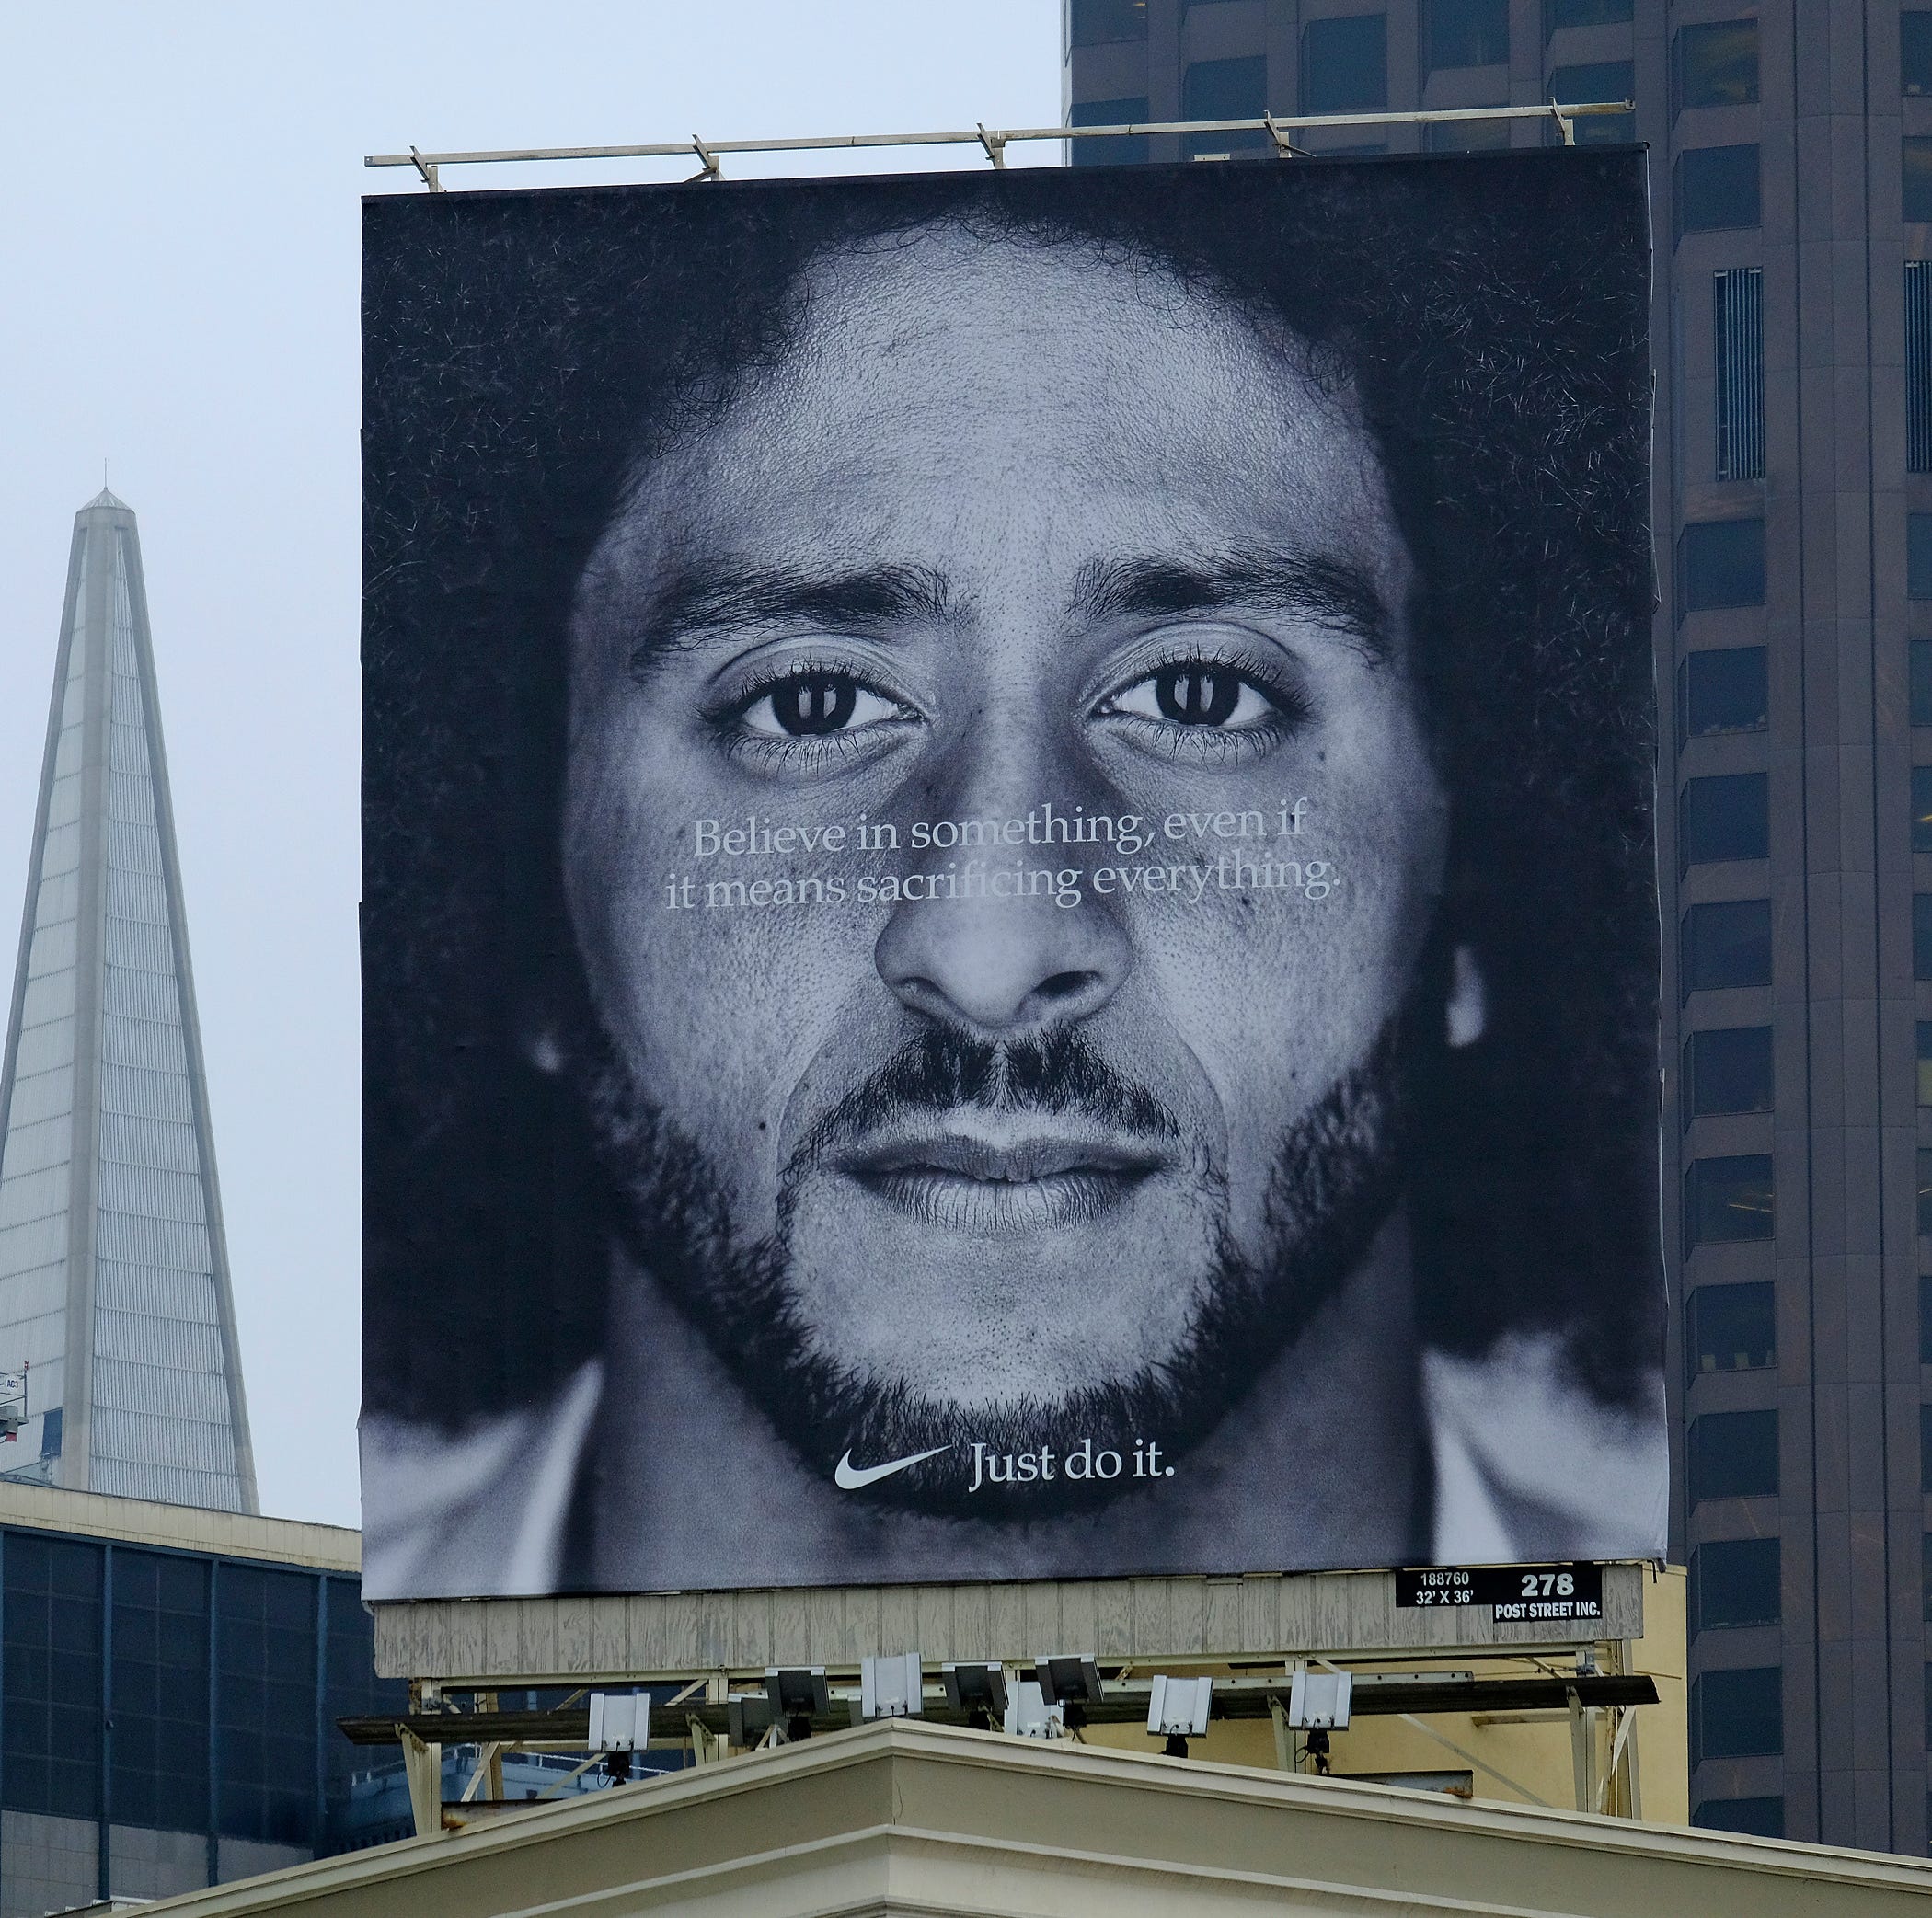 A large billboard stands on top of a Nike store at Union Square in San Francisco showing former 49ers quarterback Colin Kaepernick.